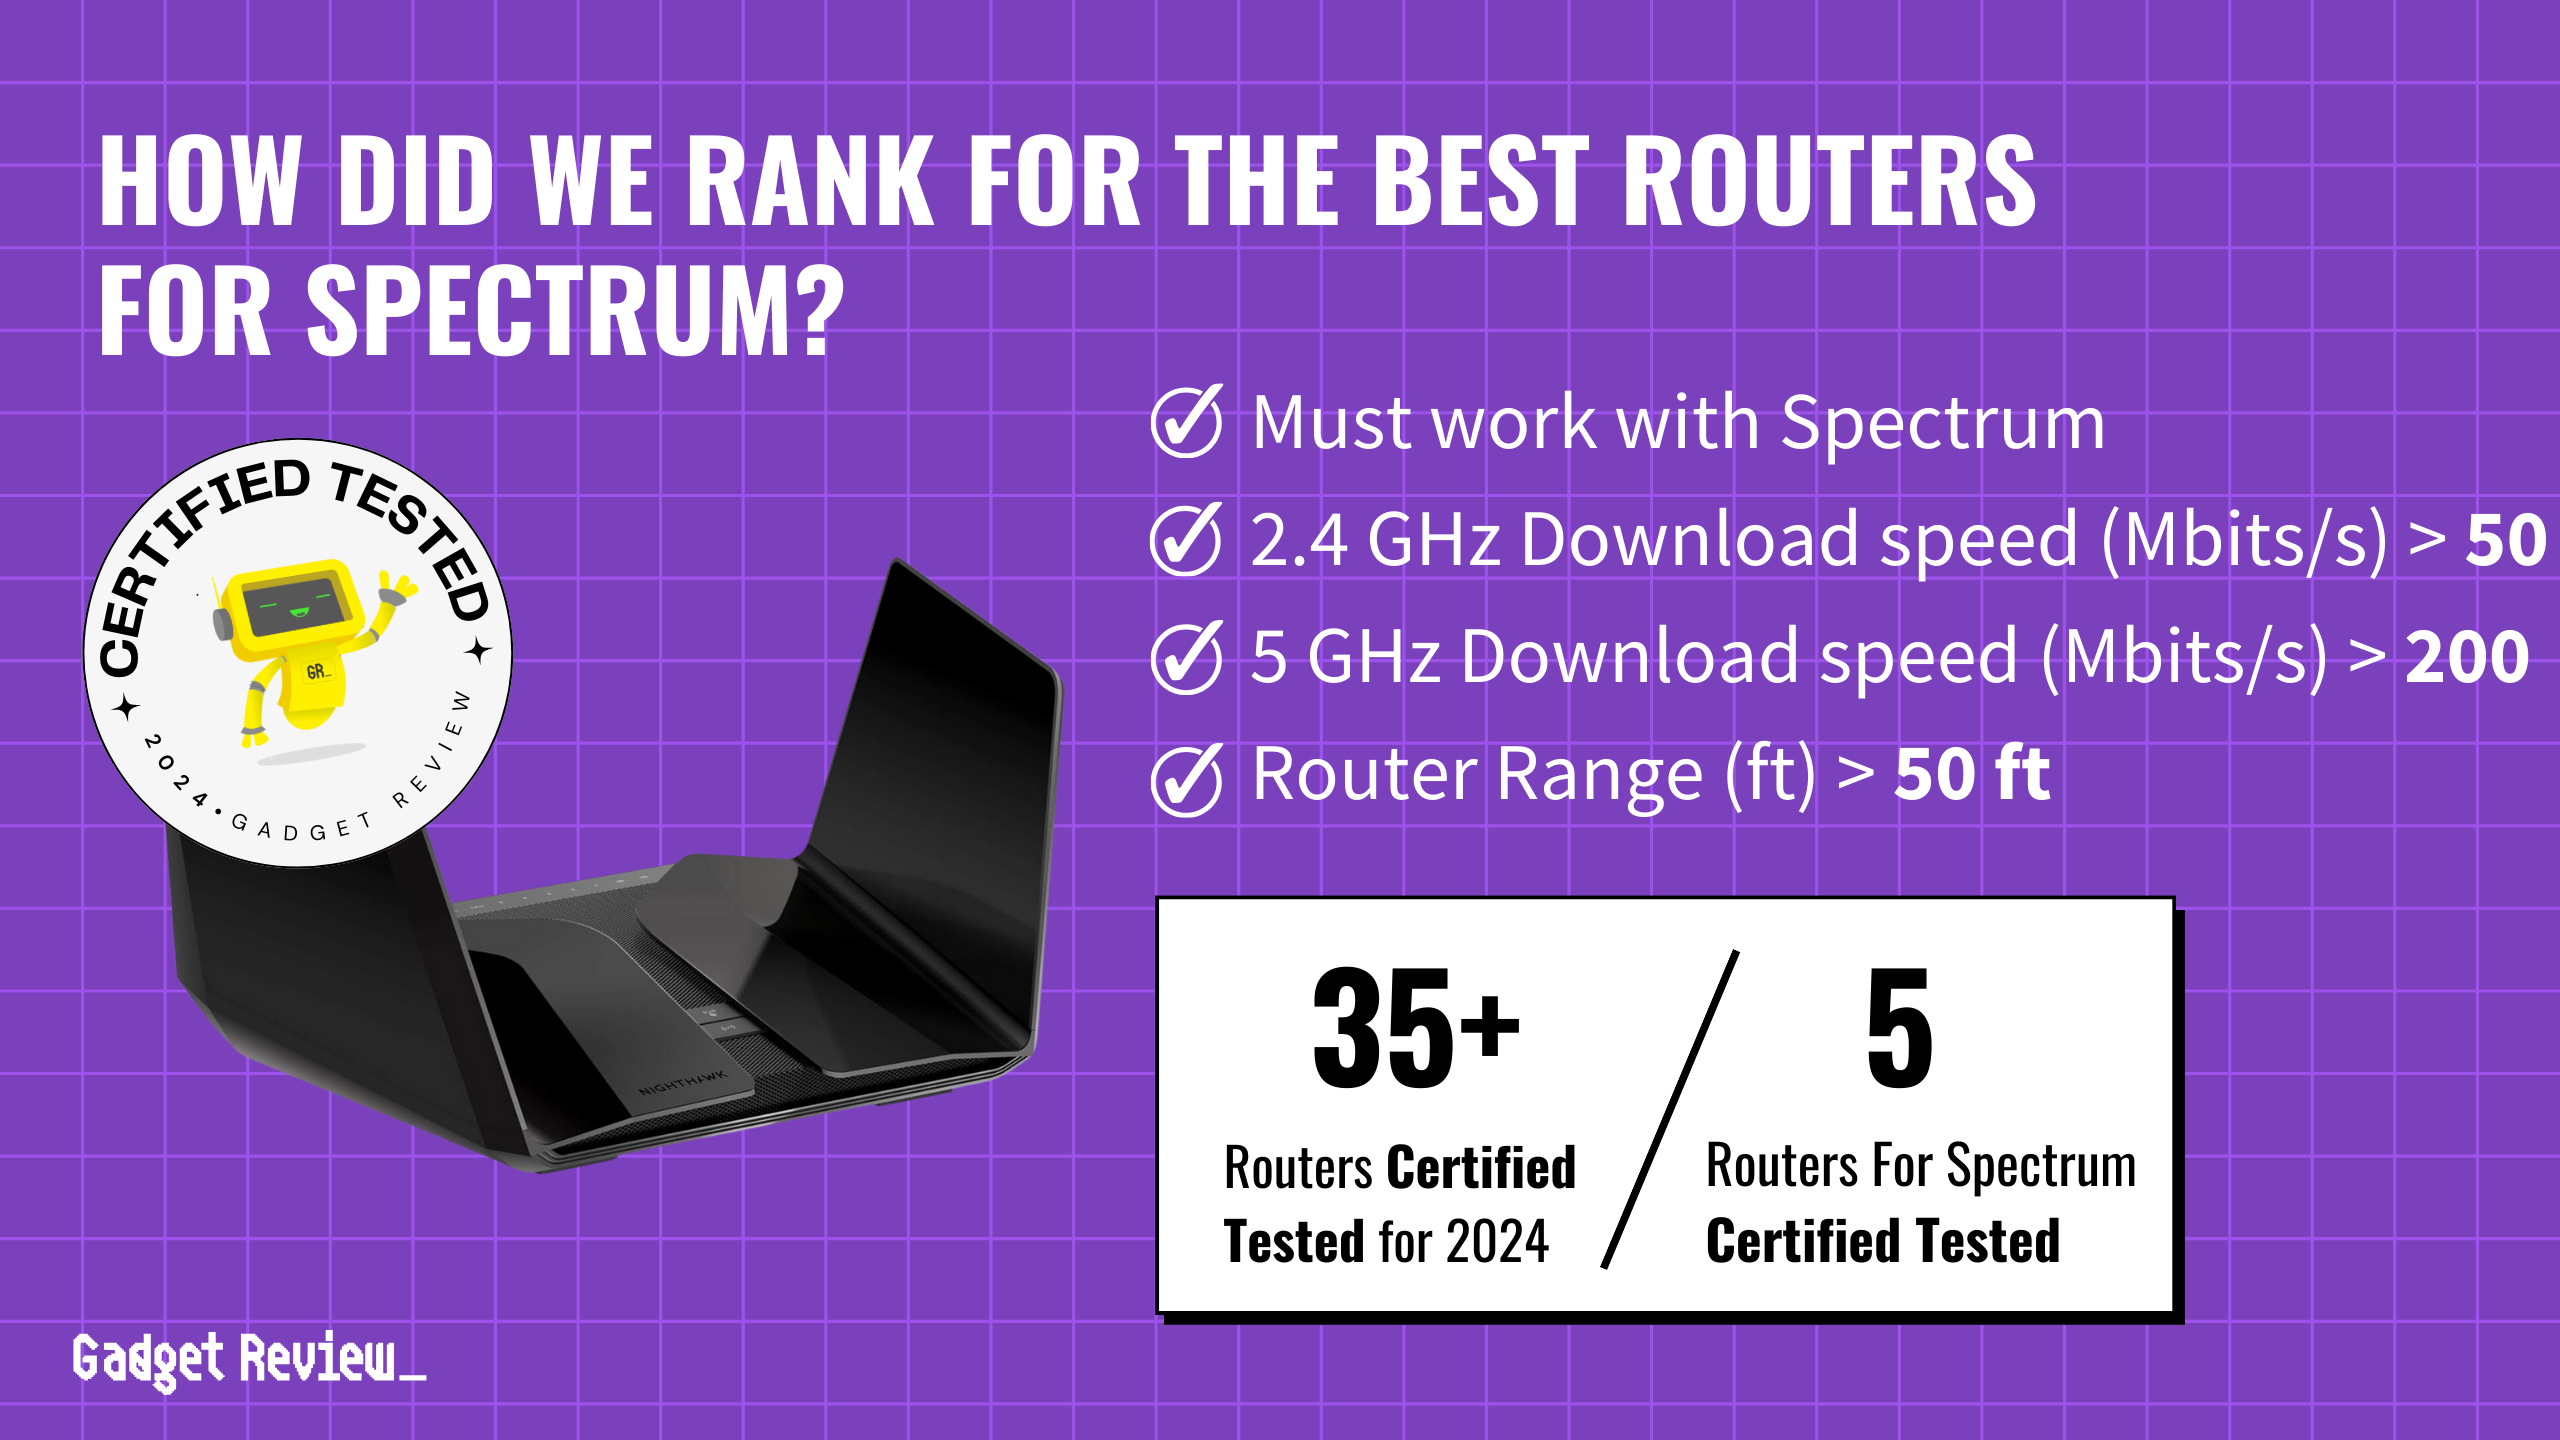 The 5 Top Routers for Spectrum in 2024